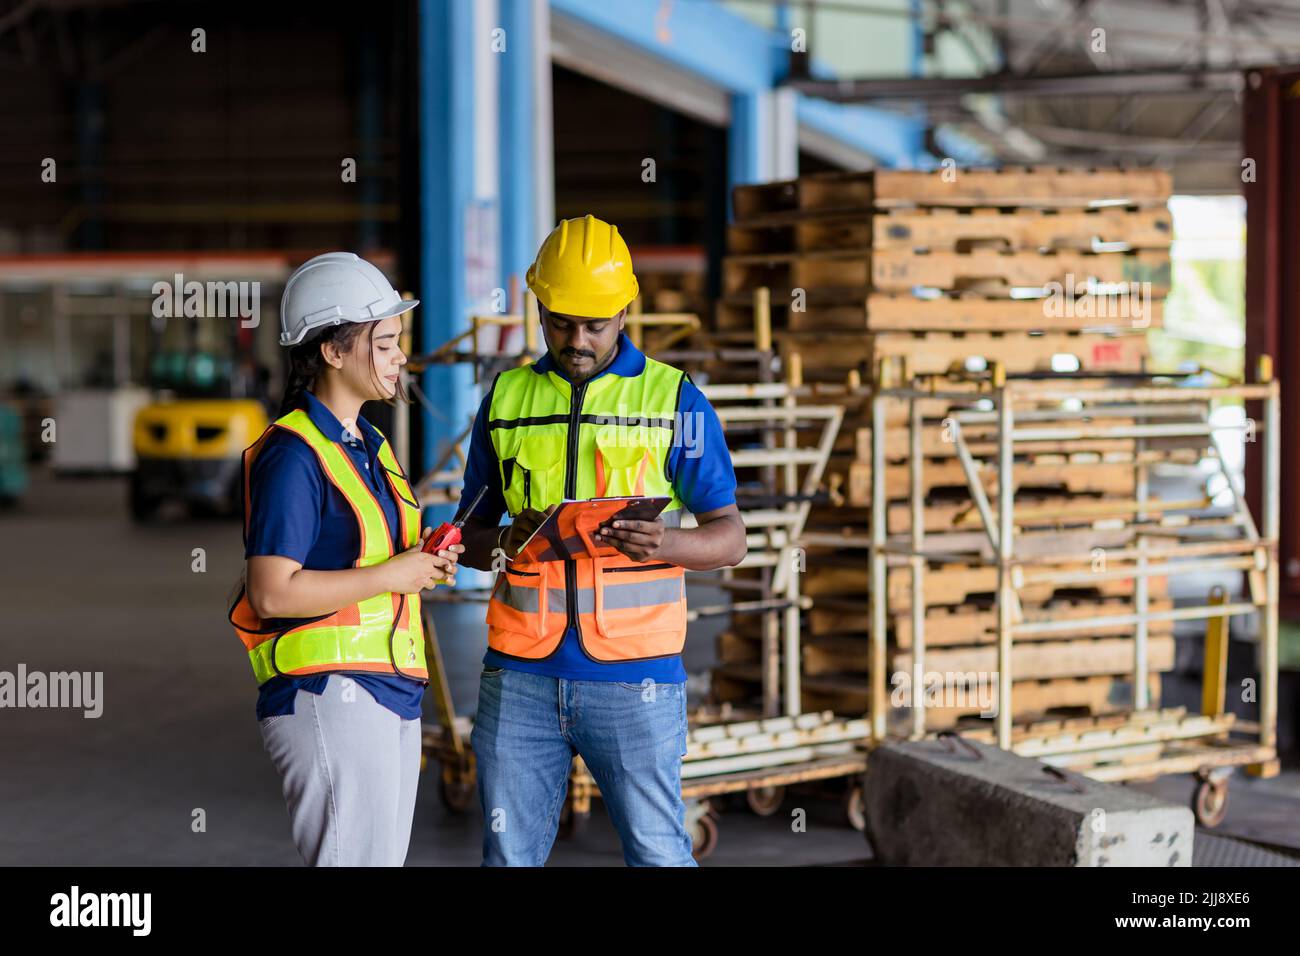 Hispanic Indian engineer worker working in port shipping cargo together. woman work with male in warehouse industry. Stock Photo